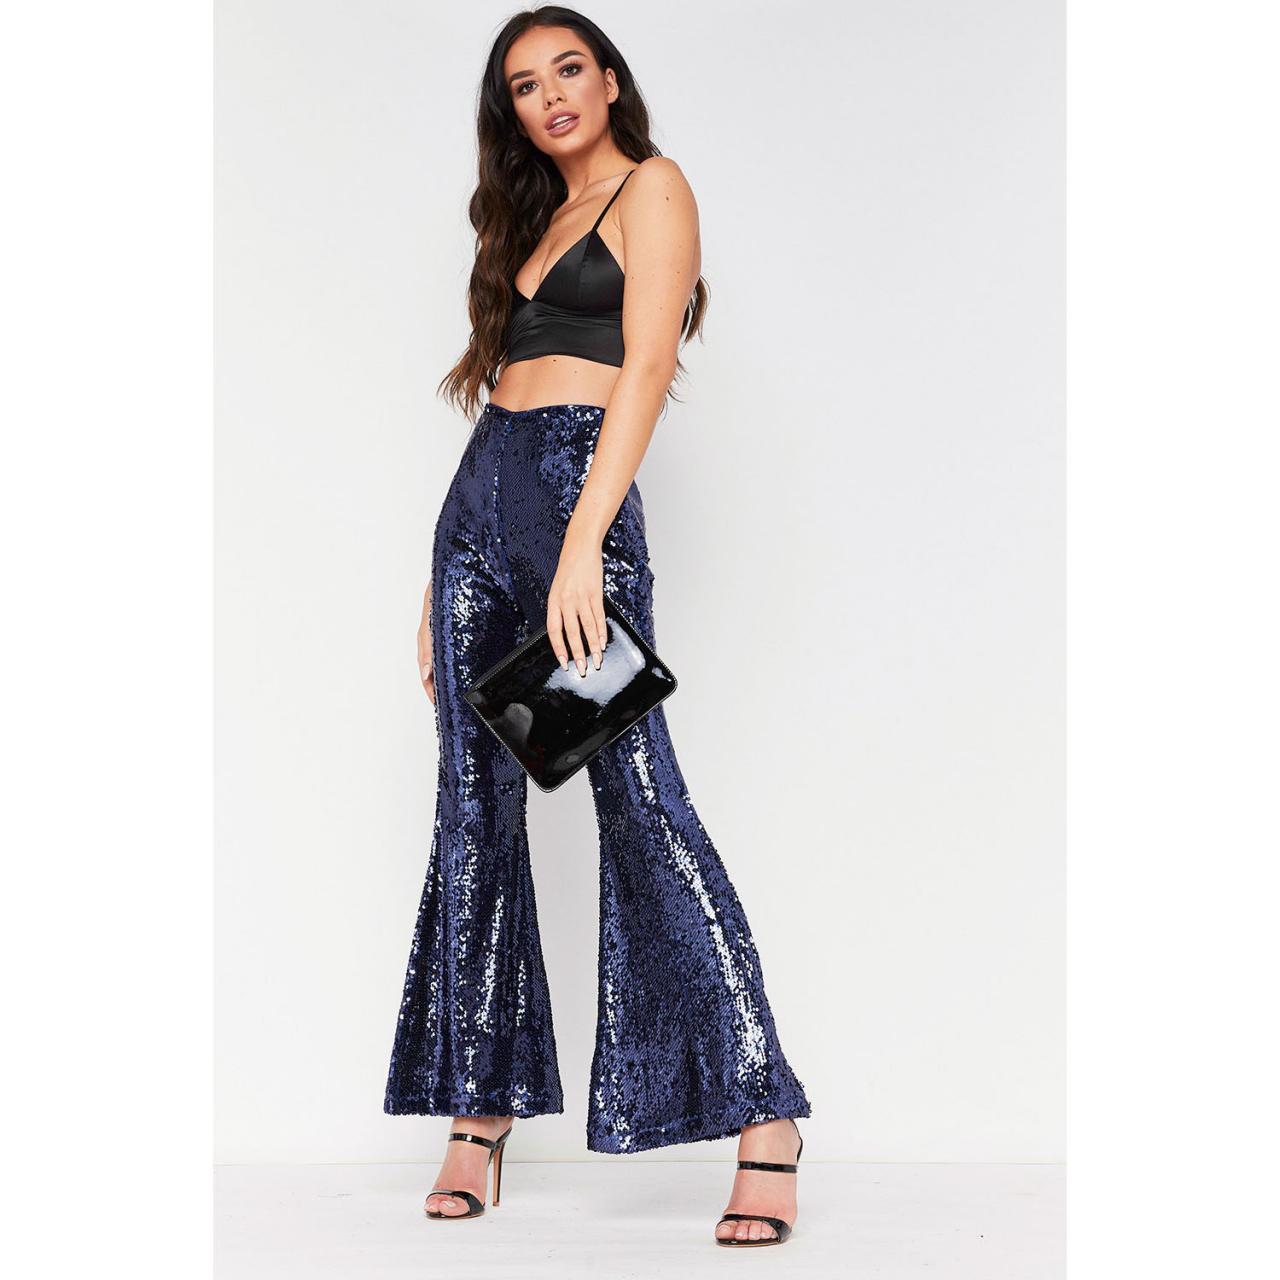 Shinning Sequins High Waist Solid Color Long Bell-bottomed Pants